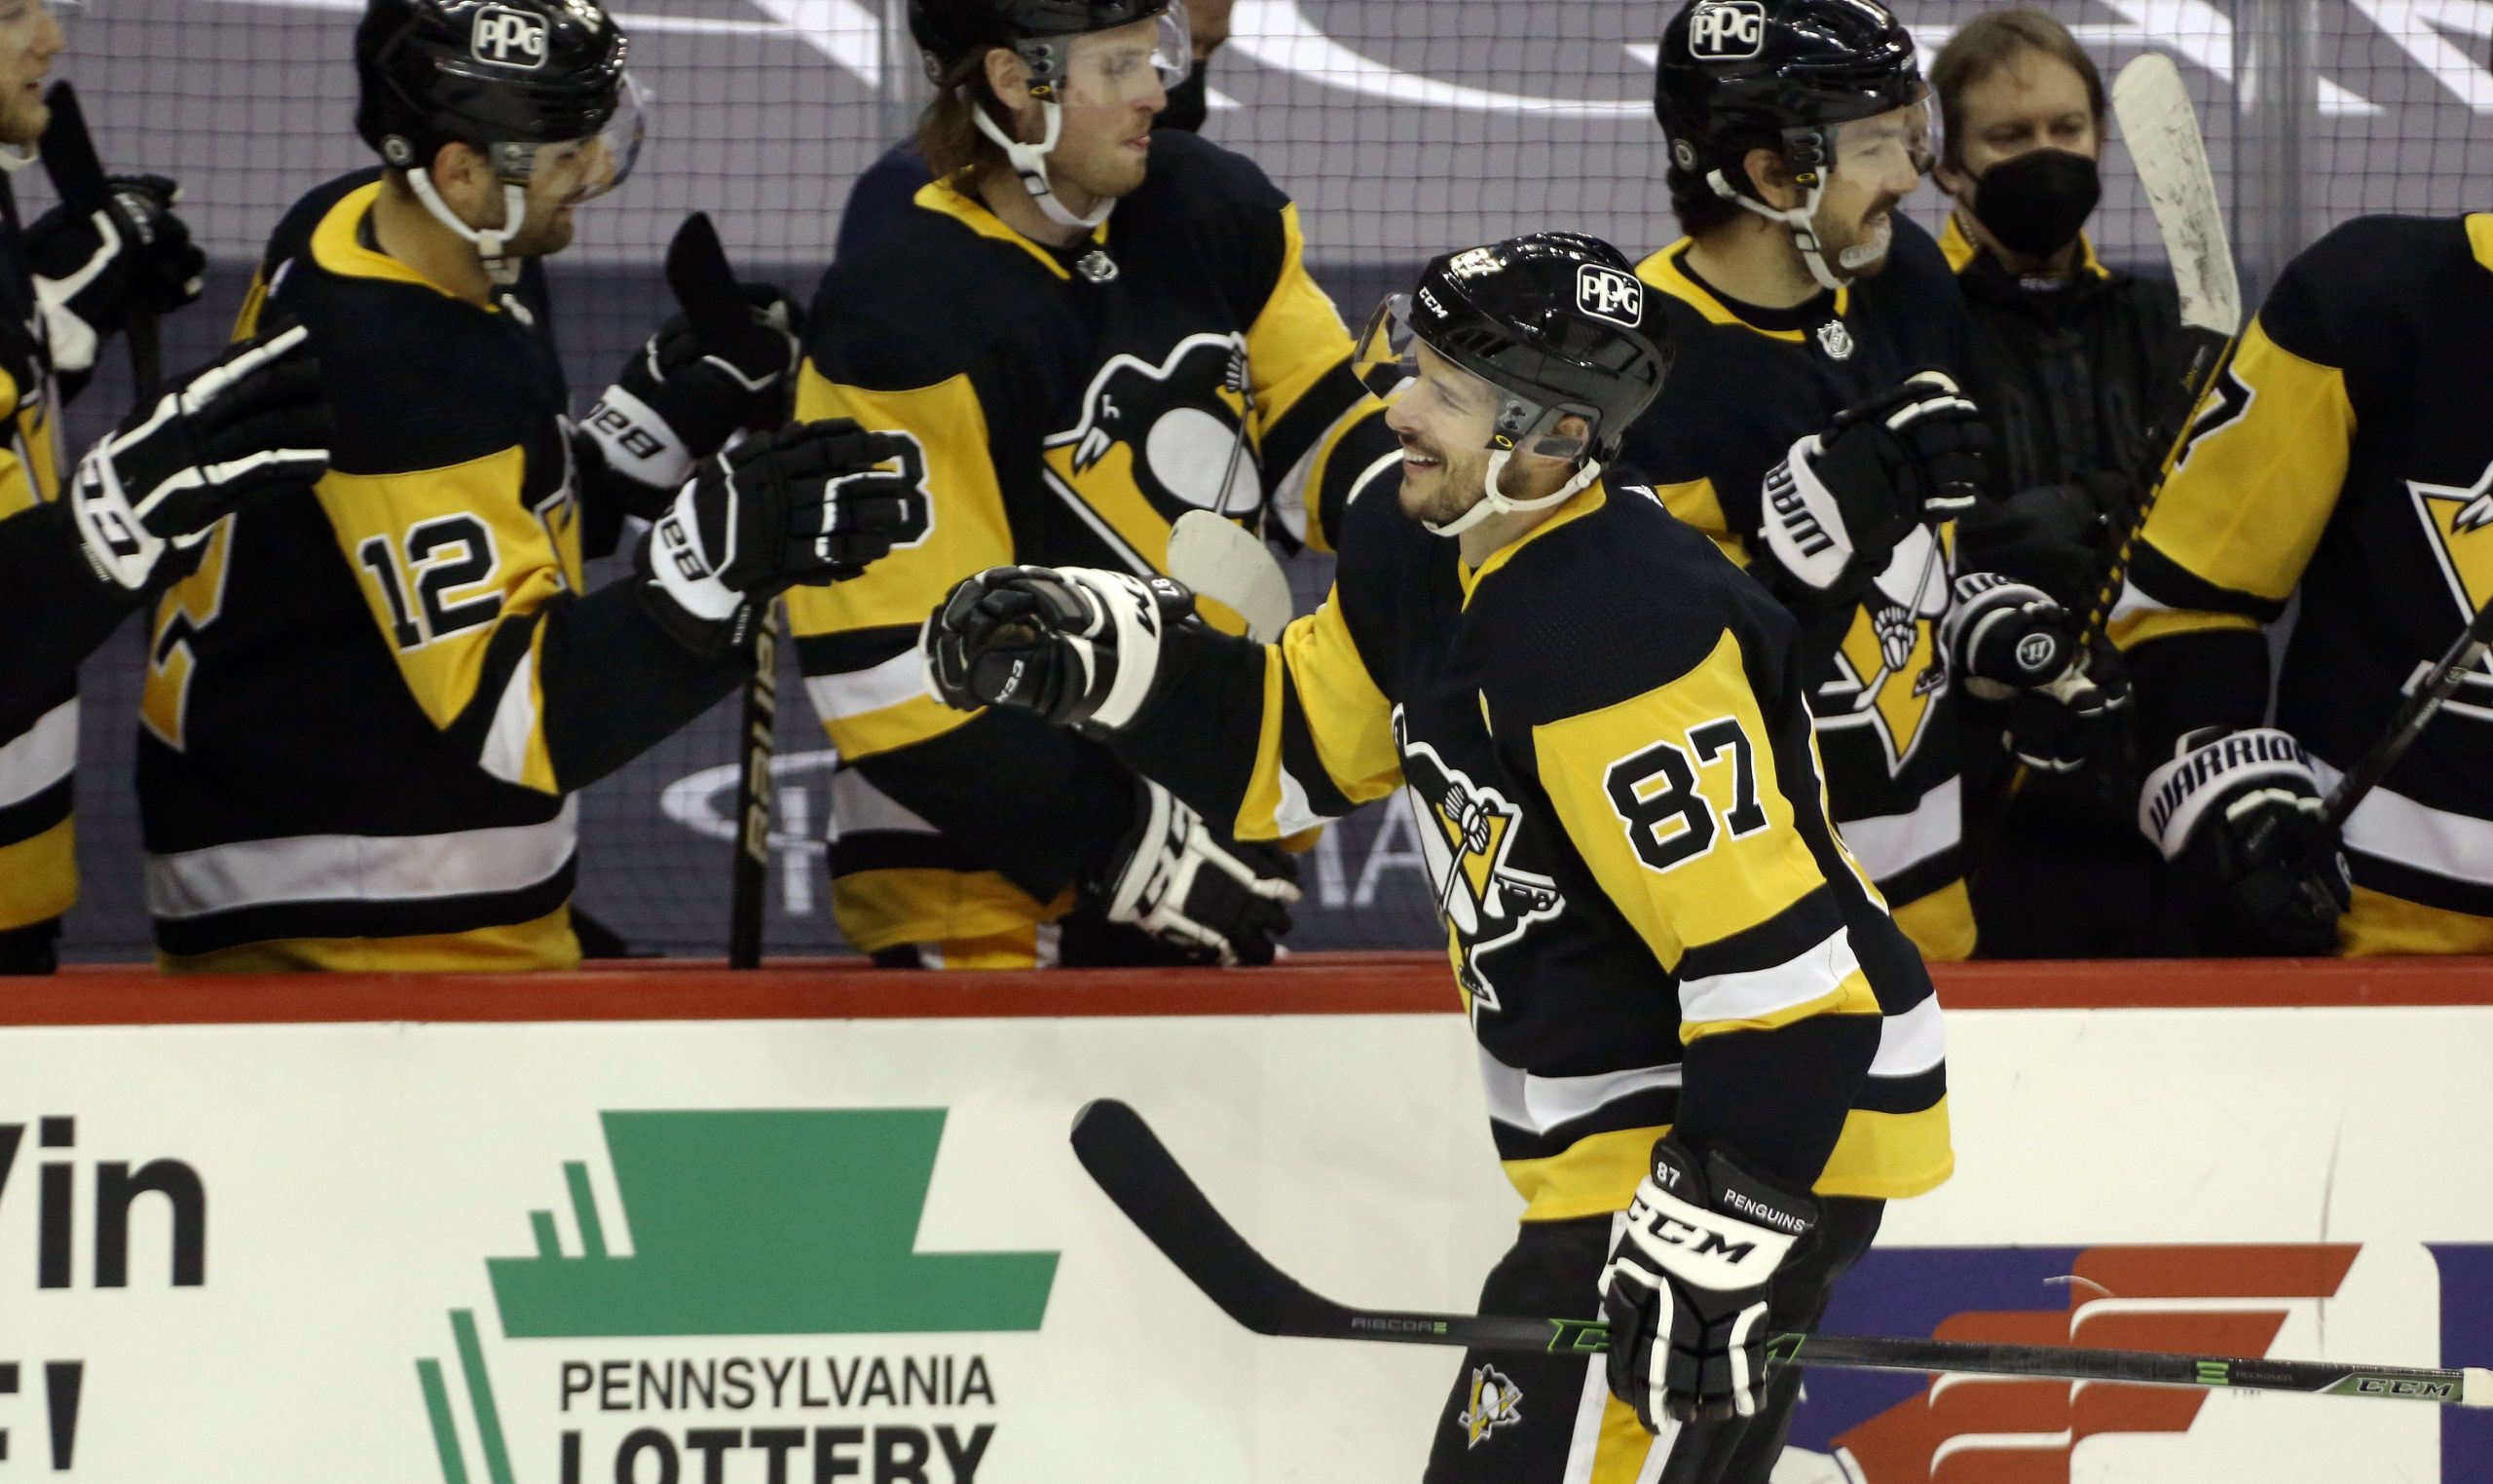 Pittsburgh Penguins center Sidney Crosby celebrates his goal with the Pens bench